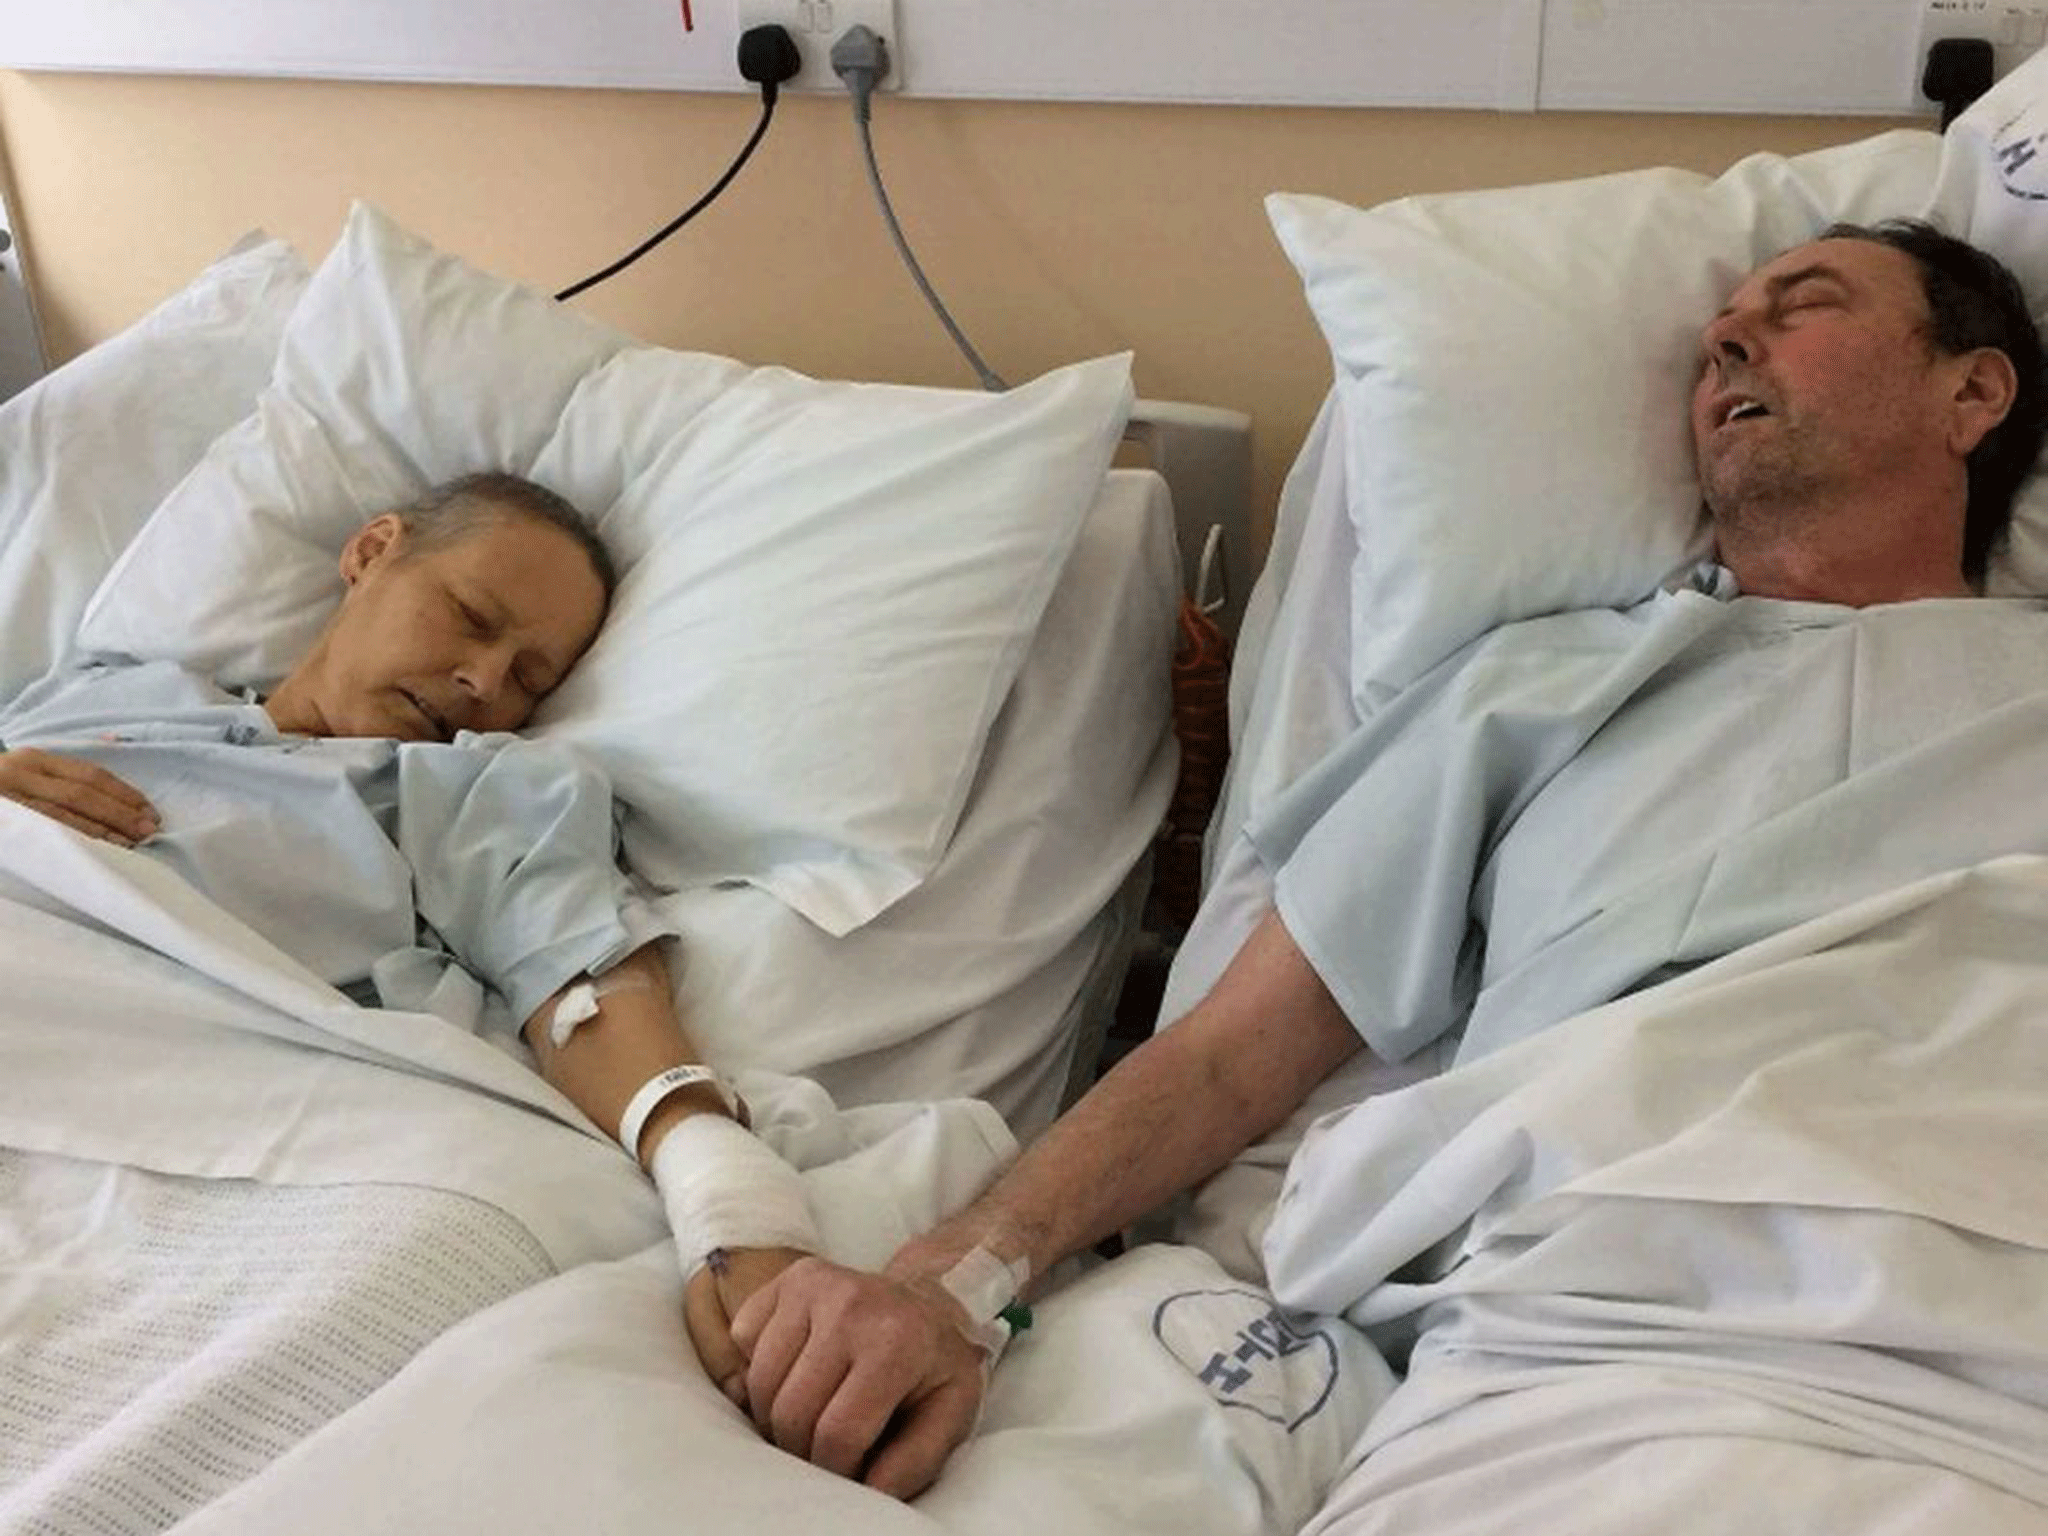 Huge donations for children whose parents both died of cancer 